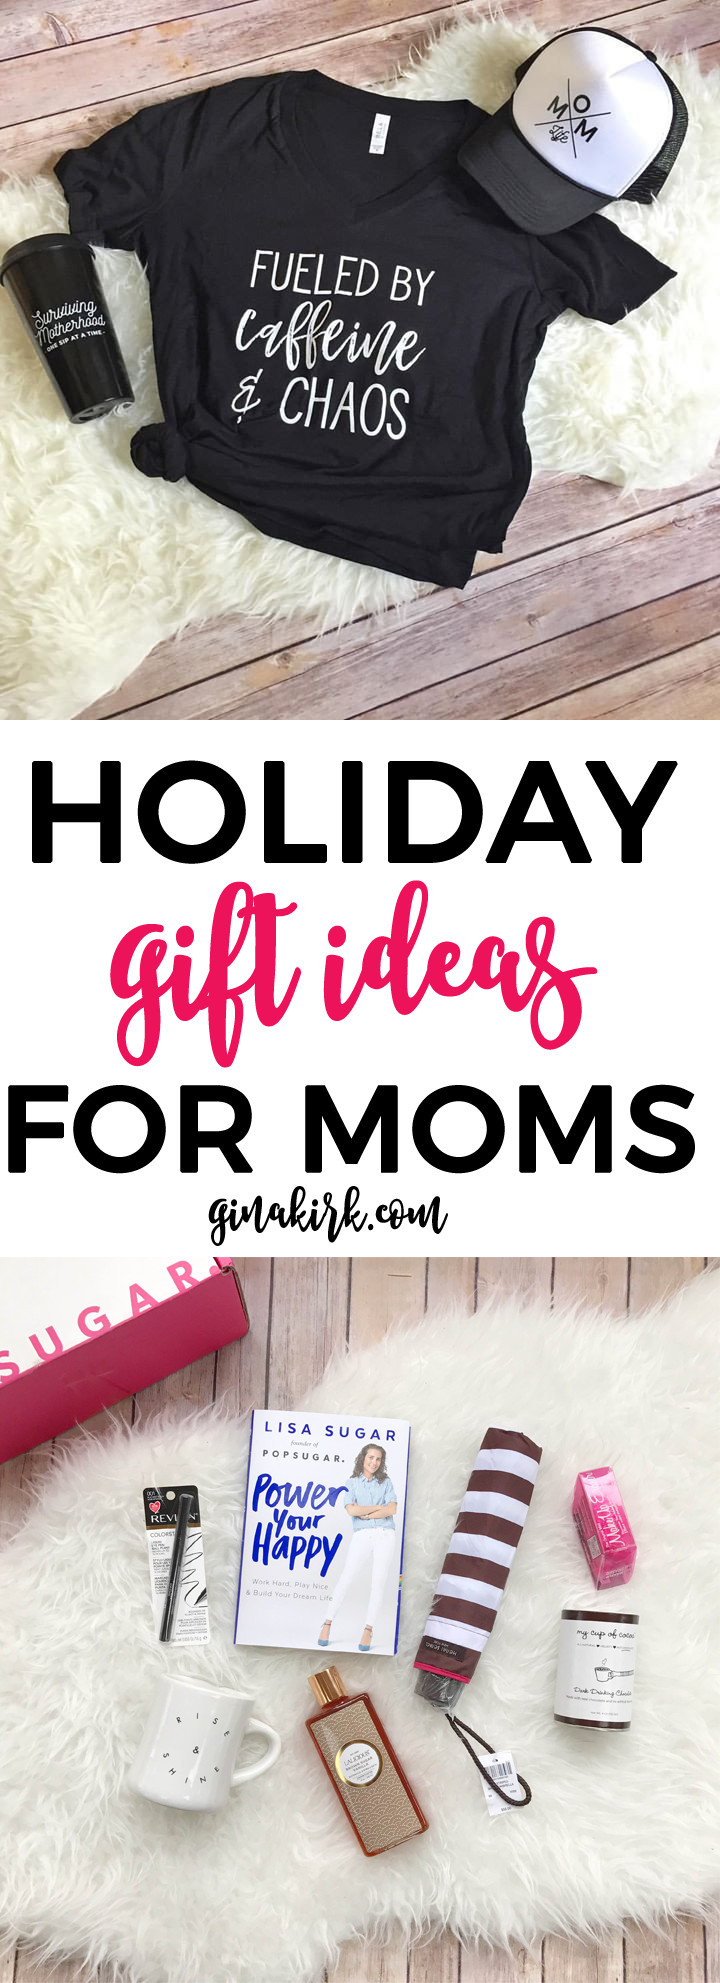 Holiday Gift Ideas For Mom
 Holiday Gift Ideas for Moms